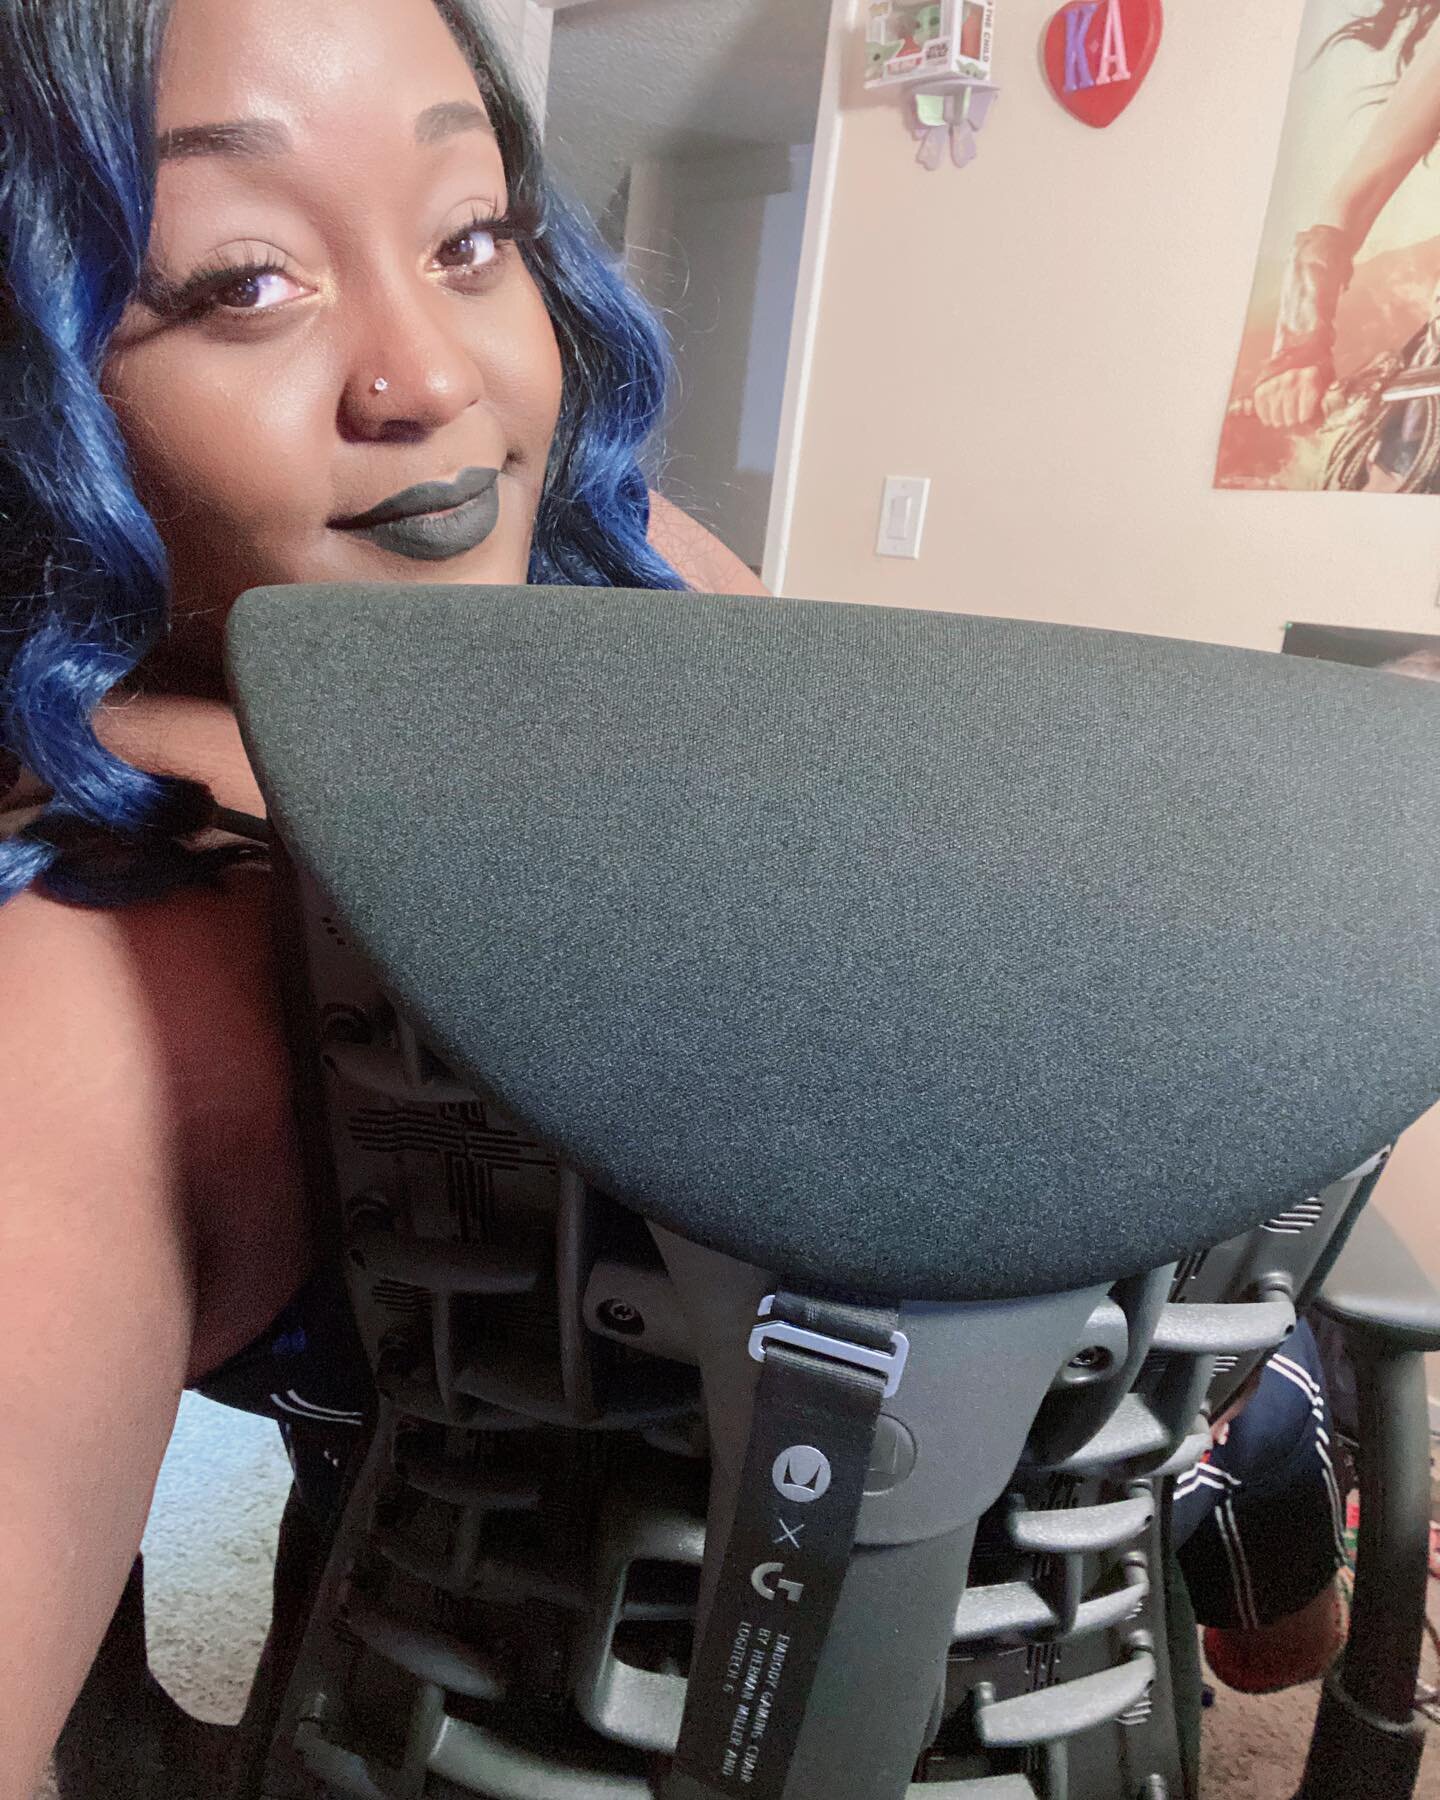 The queens throne 👑 👸🏾 thank you for the new tag for my chair! The Embody Chaor has been such a blessing to my setup and back!

@hermanmiller @logitechg 

#logitechgpartner #streamer #streaming #gaming #gamer #hermanmiller #blackgirlmagic #blackgi